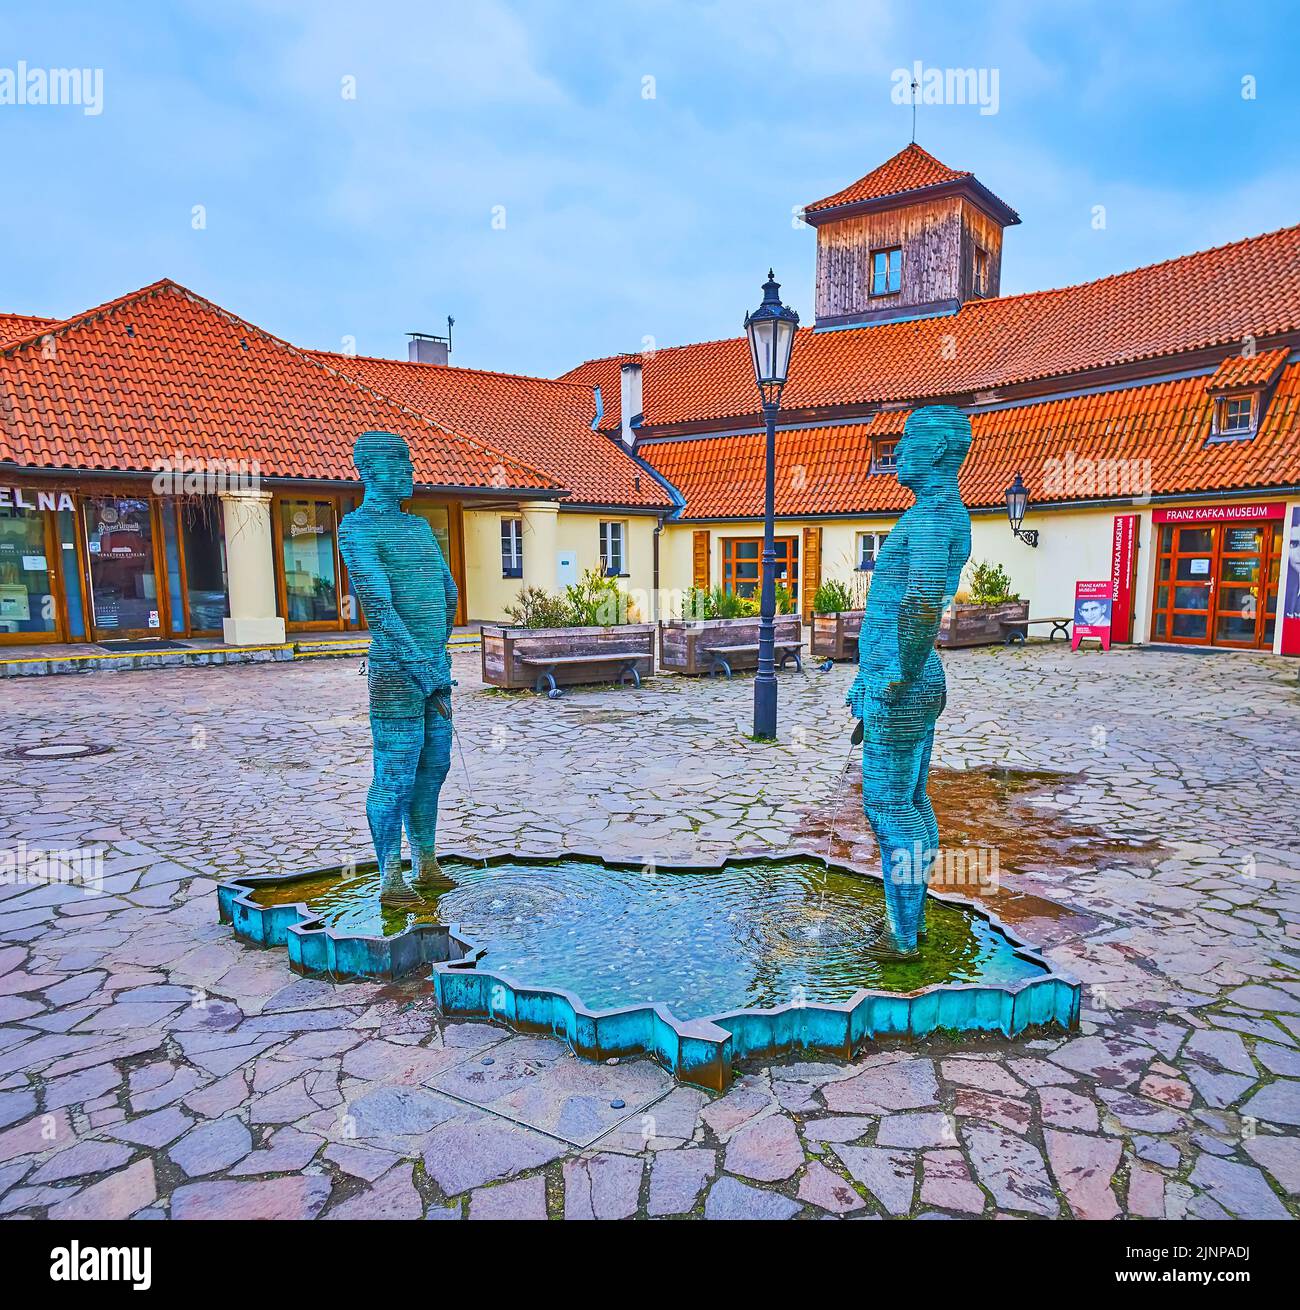 PRAGUE, CZECH REPUBLIC - MARCH 6, 2022:  The modern Piss sculptural group by David Cerny, located in Lesser Quarter in front of Franz Kafka Museum, on Stock Photo